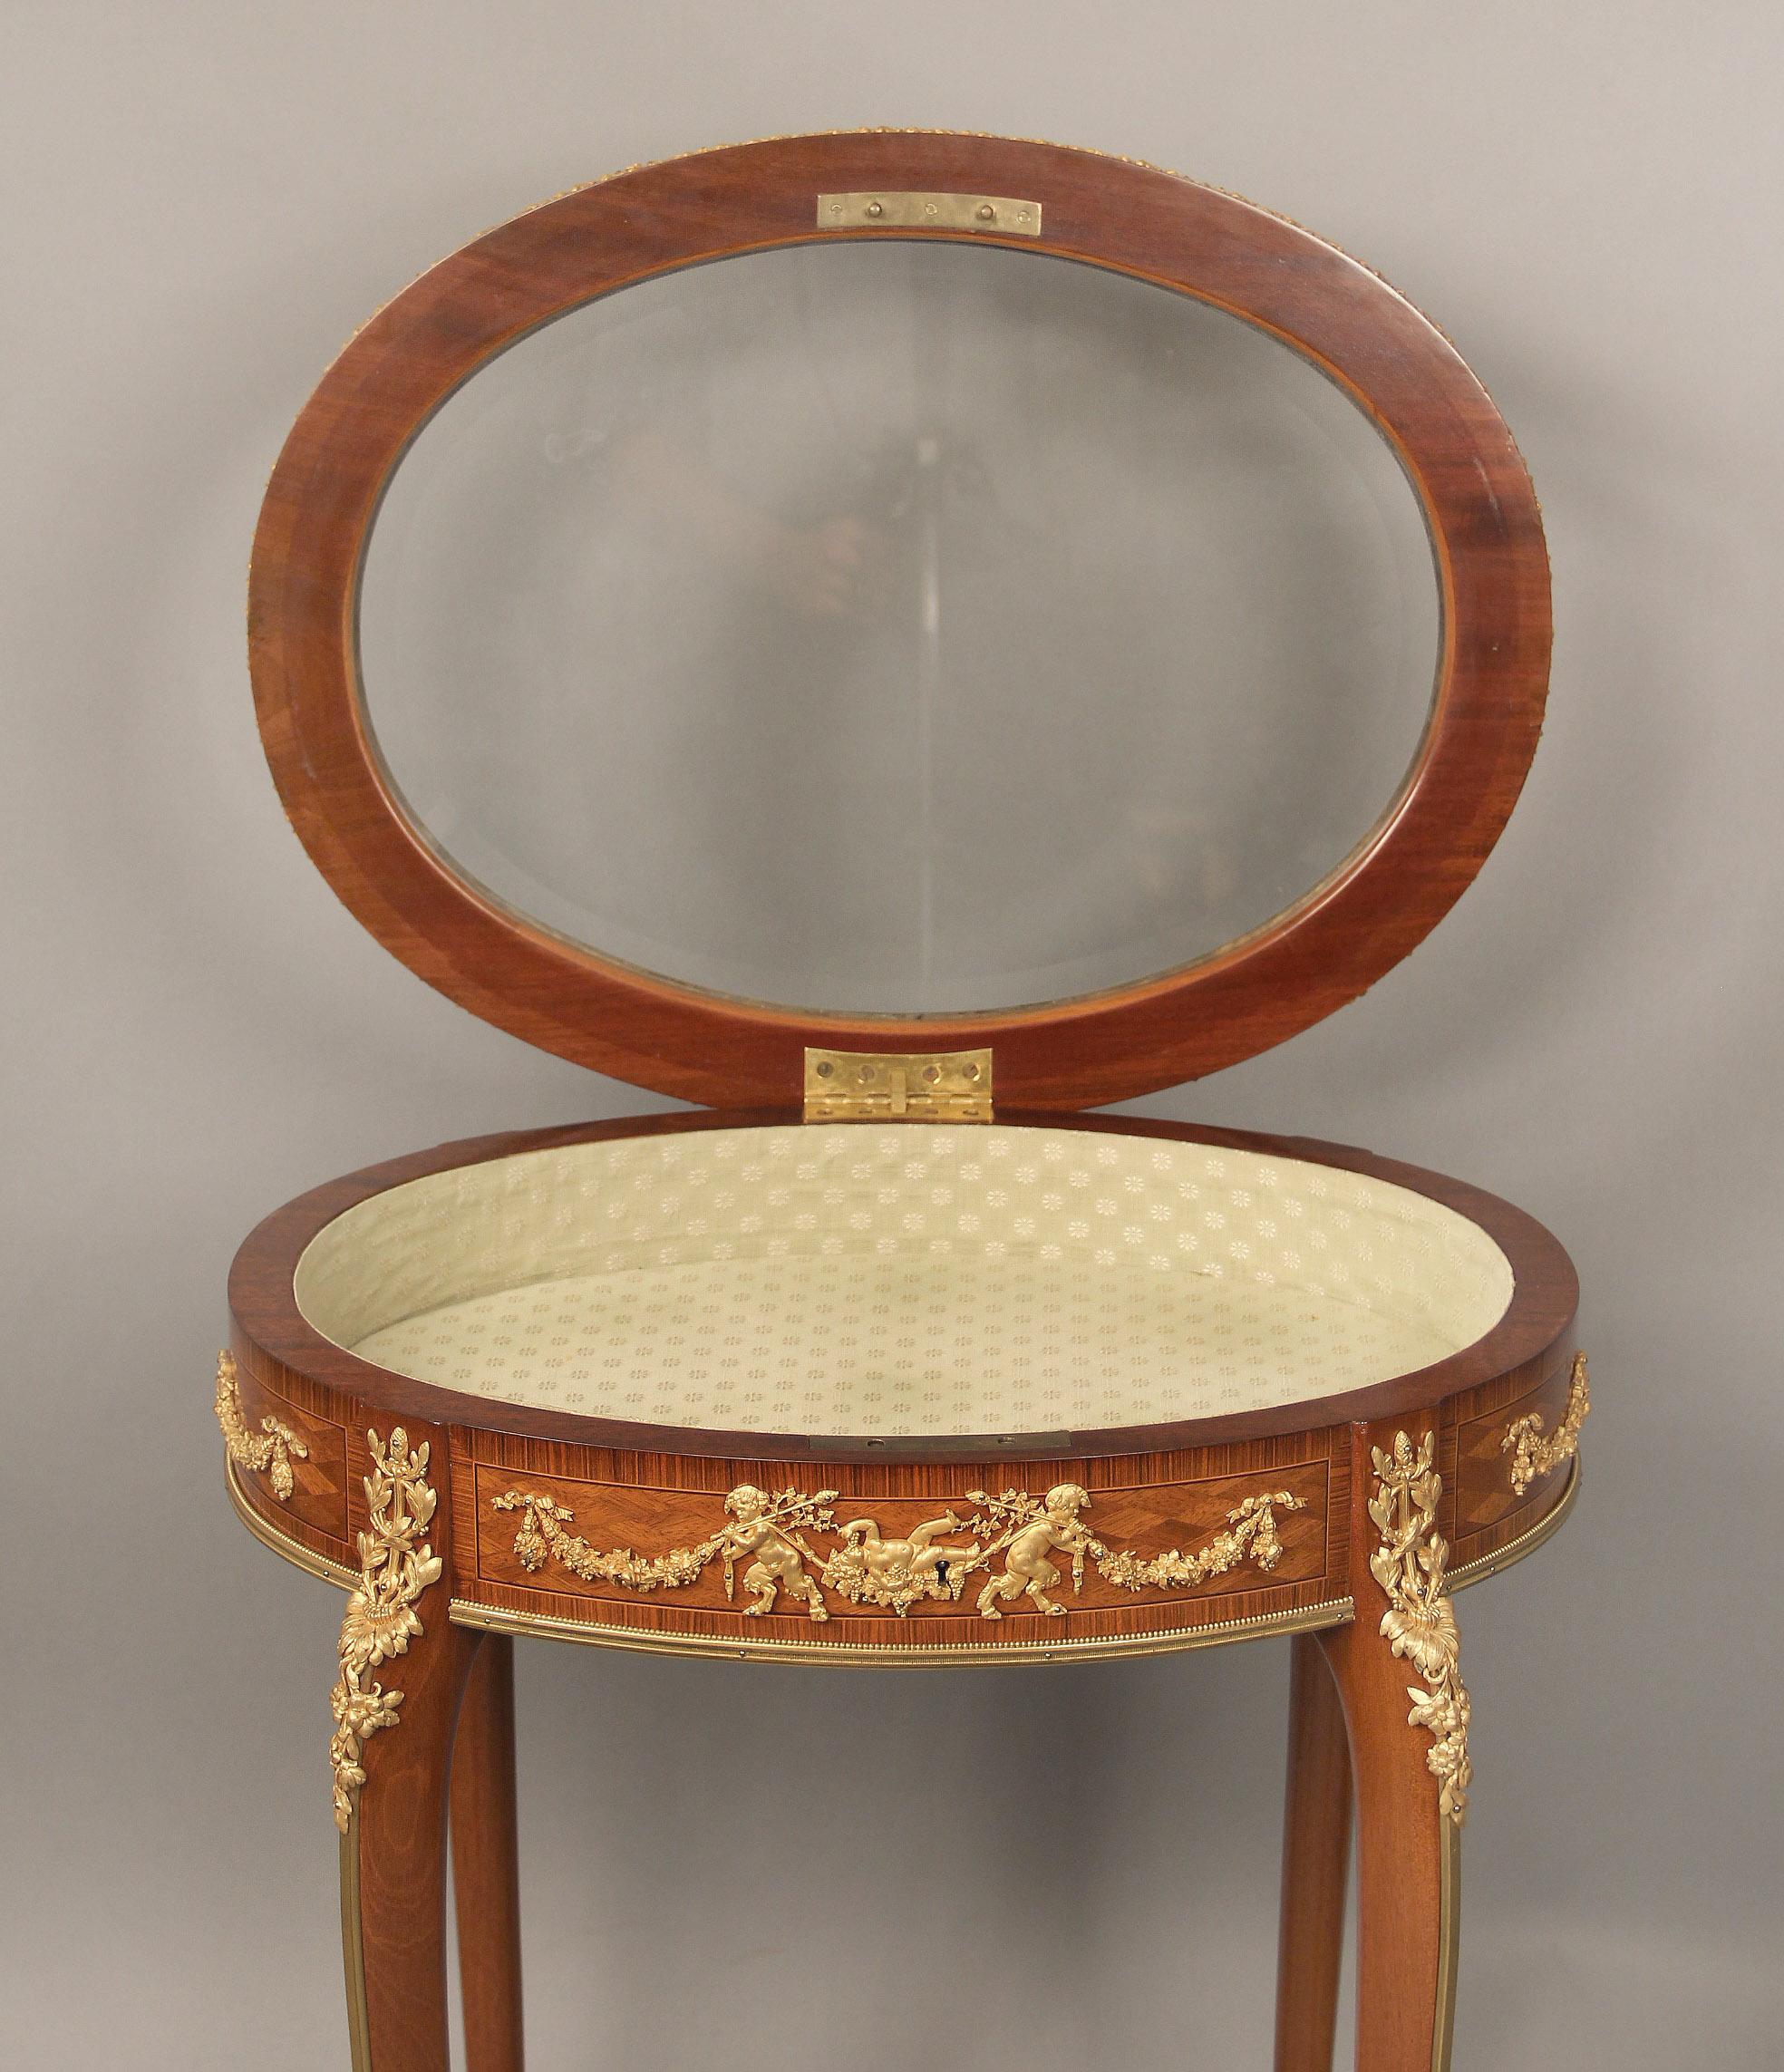 A lovely early 20th century Louis XV style gilt bronze mounted parquetry vitrine table by François Linke

François Linke

The oval shaped table with a beveled glass top encircled by an all floral frieze, the front and back with matching bronze